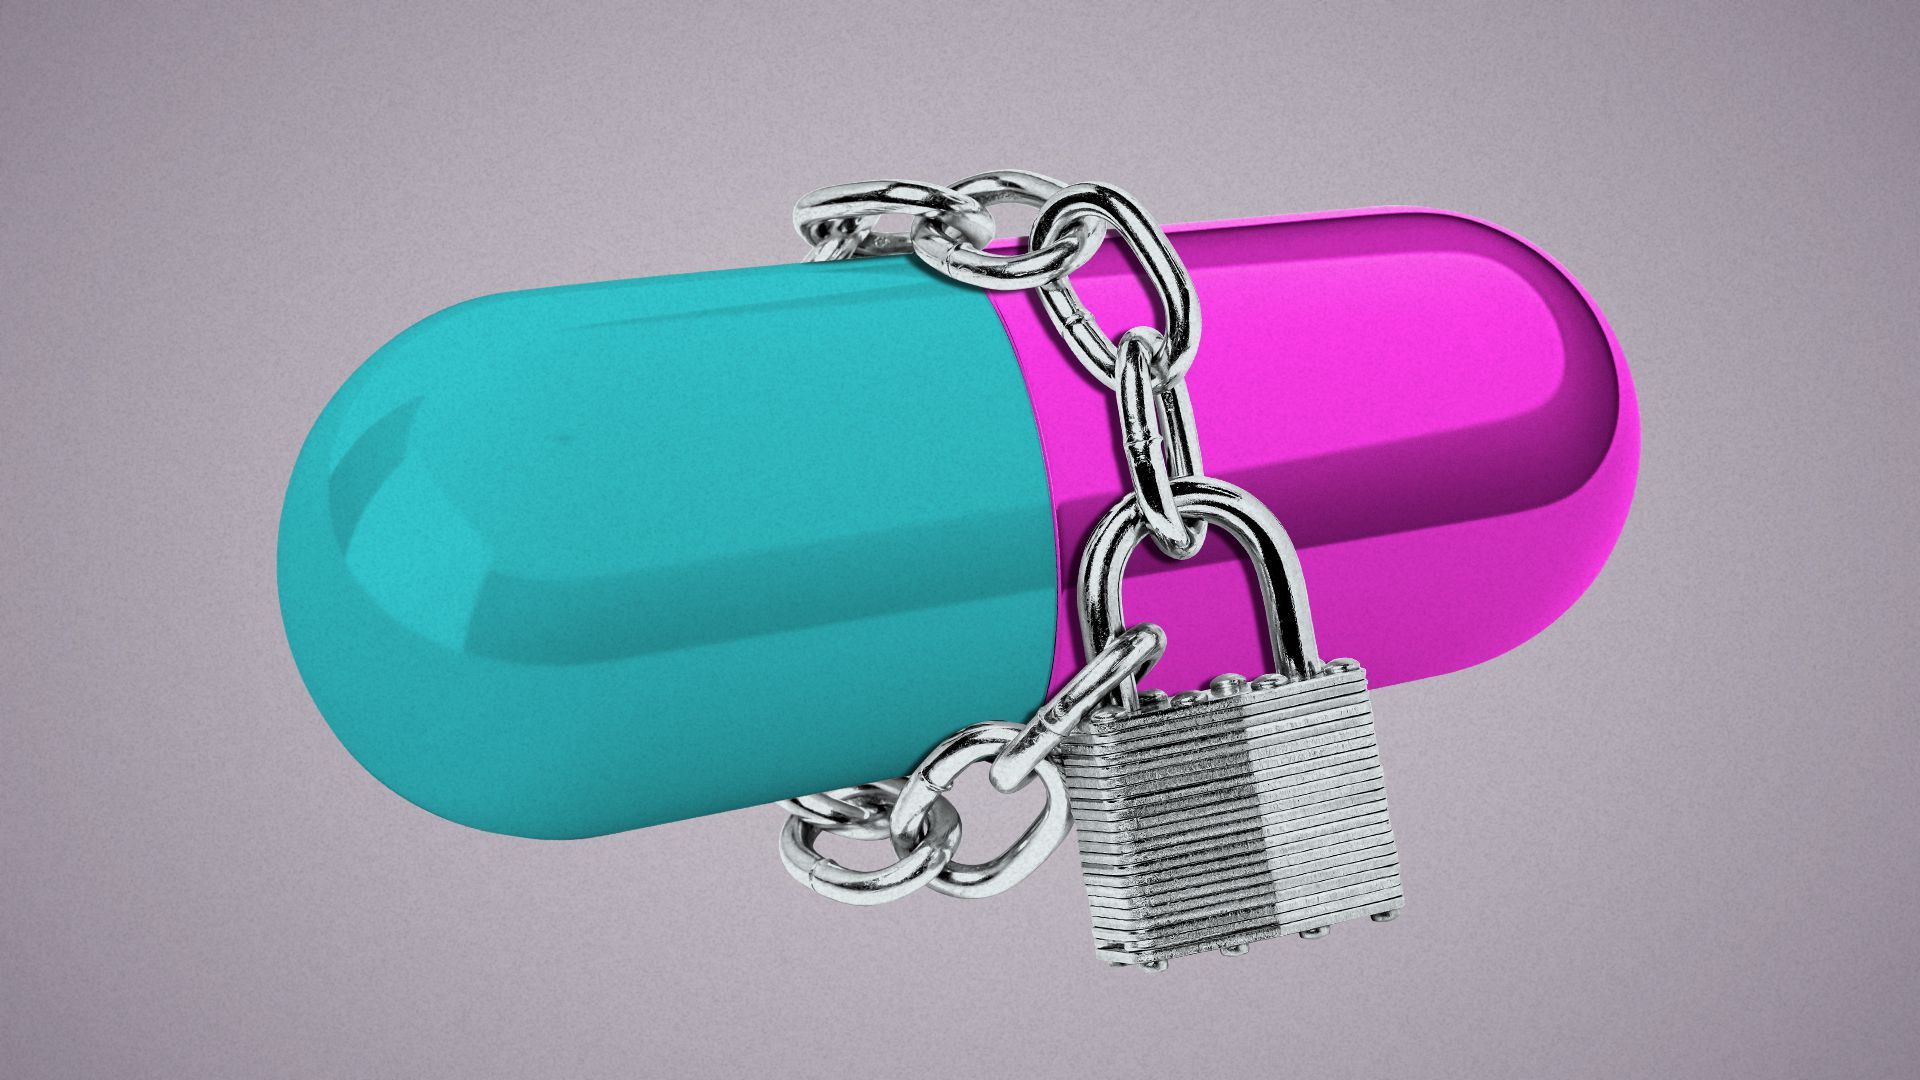 Illustration of a chain and padlock enclosing a pill capsule.